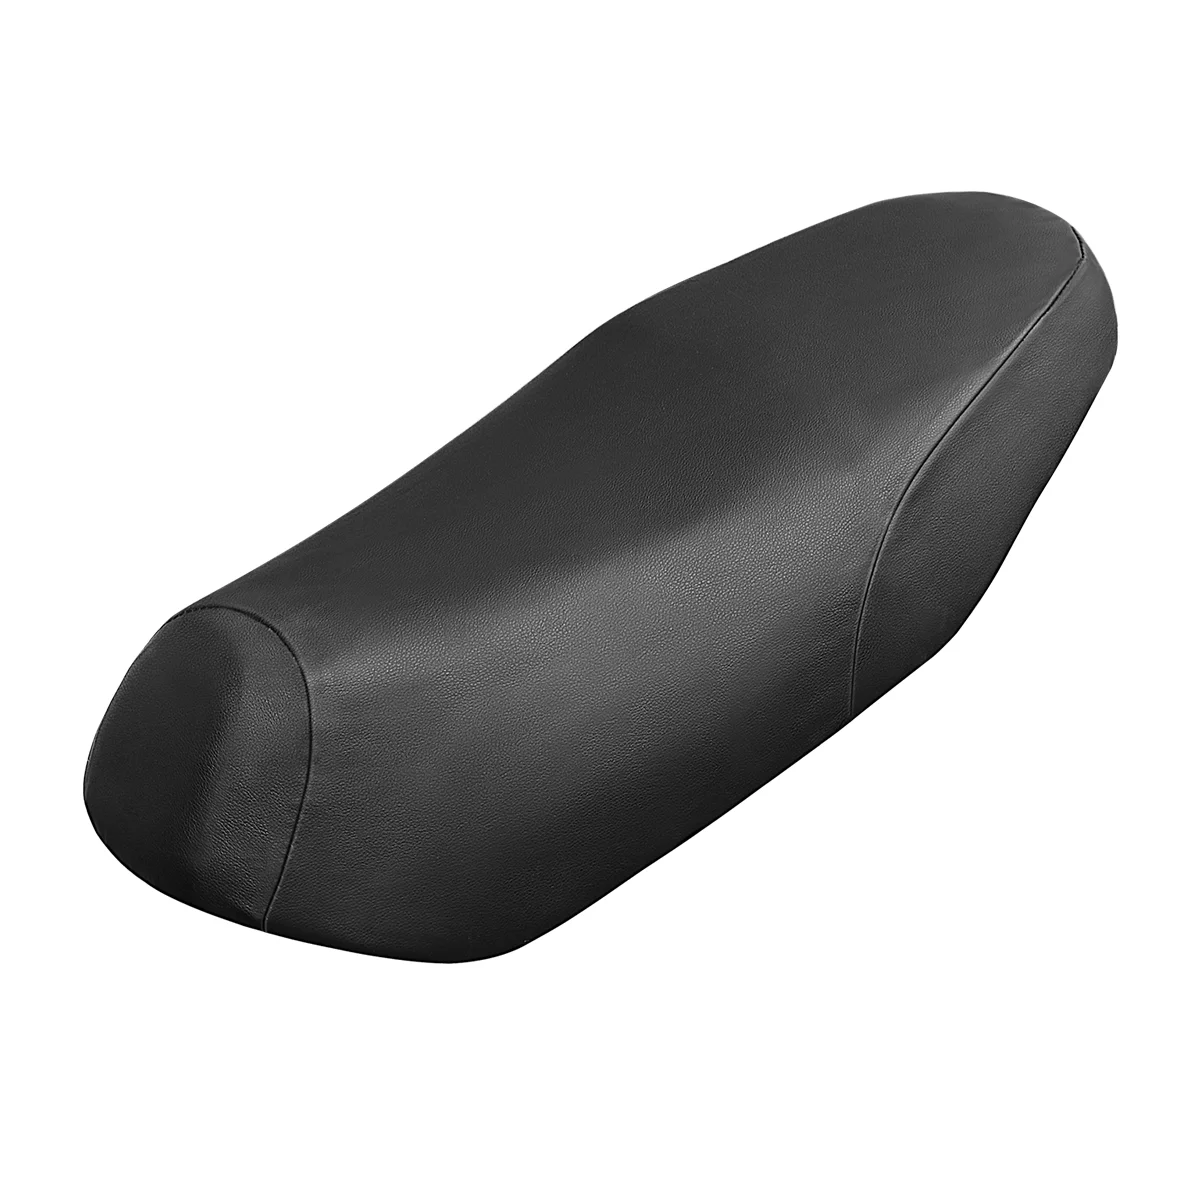 Horse Saddle Pad Motorcycle Saddle Electrombile Cover Electrombile Saddle Cushion Electrombile Seat Cover Accessories